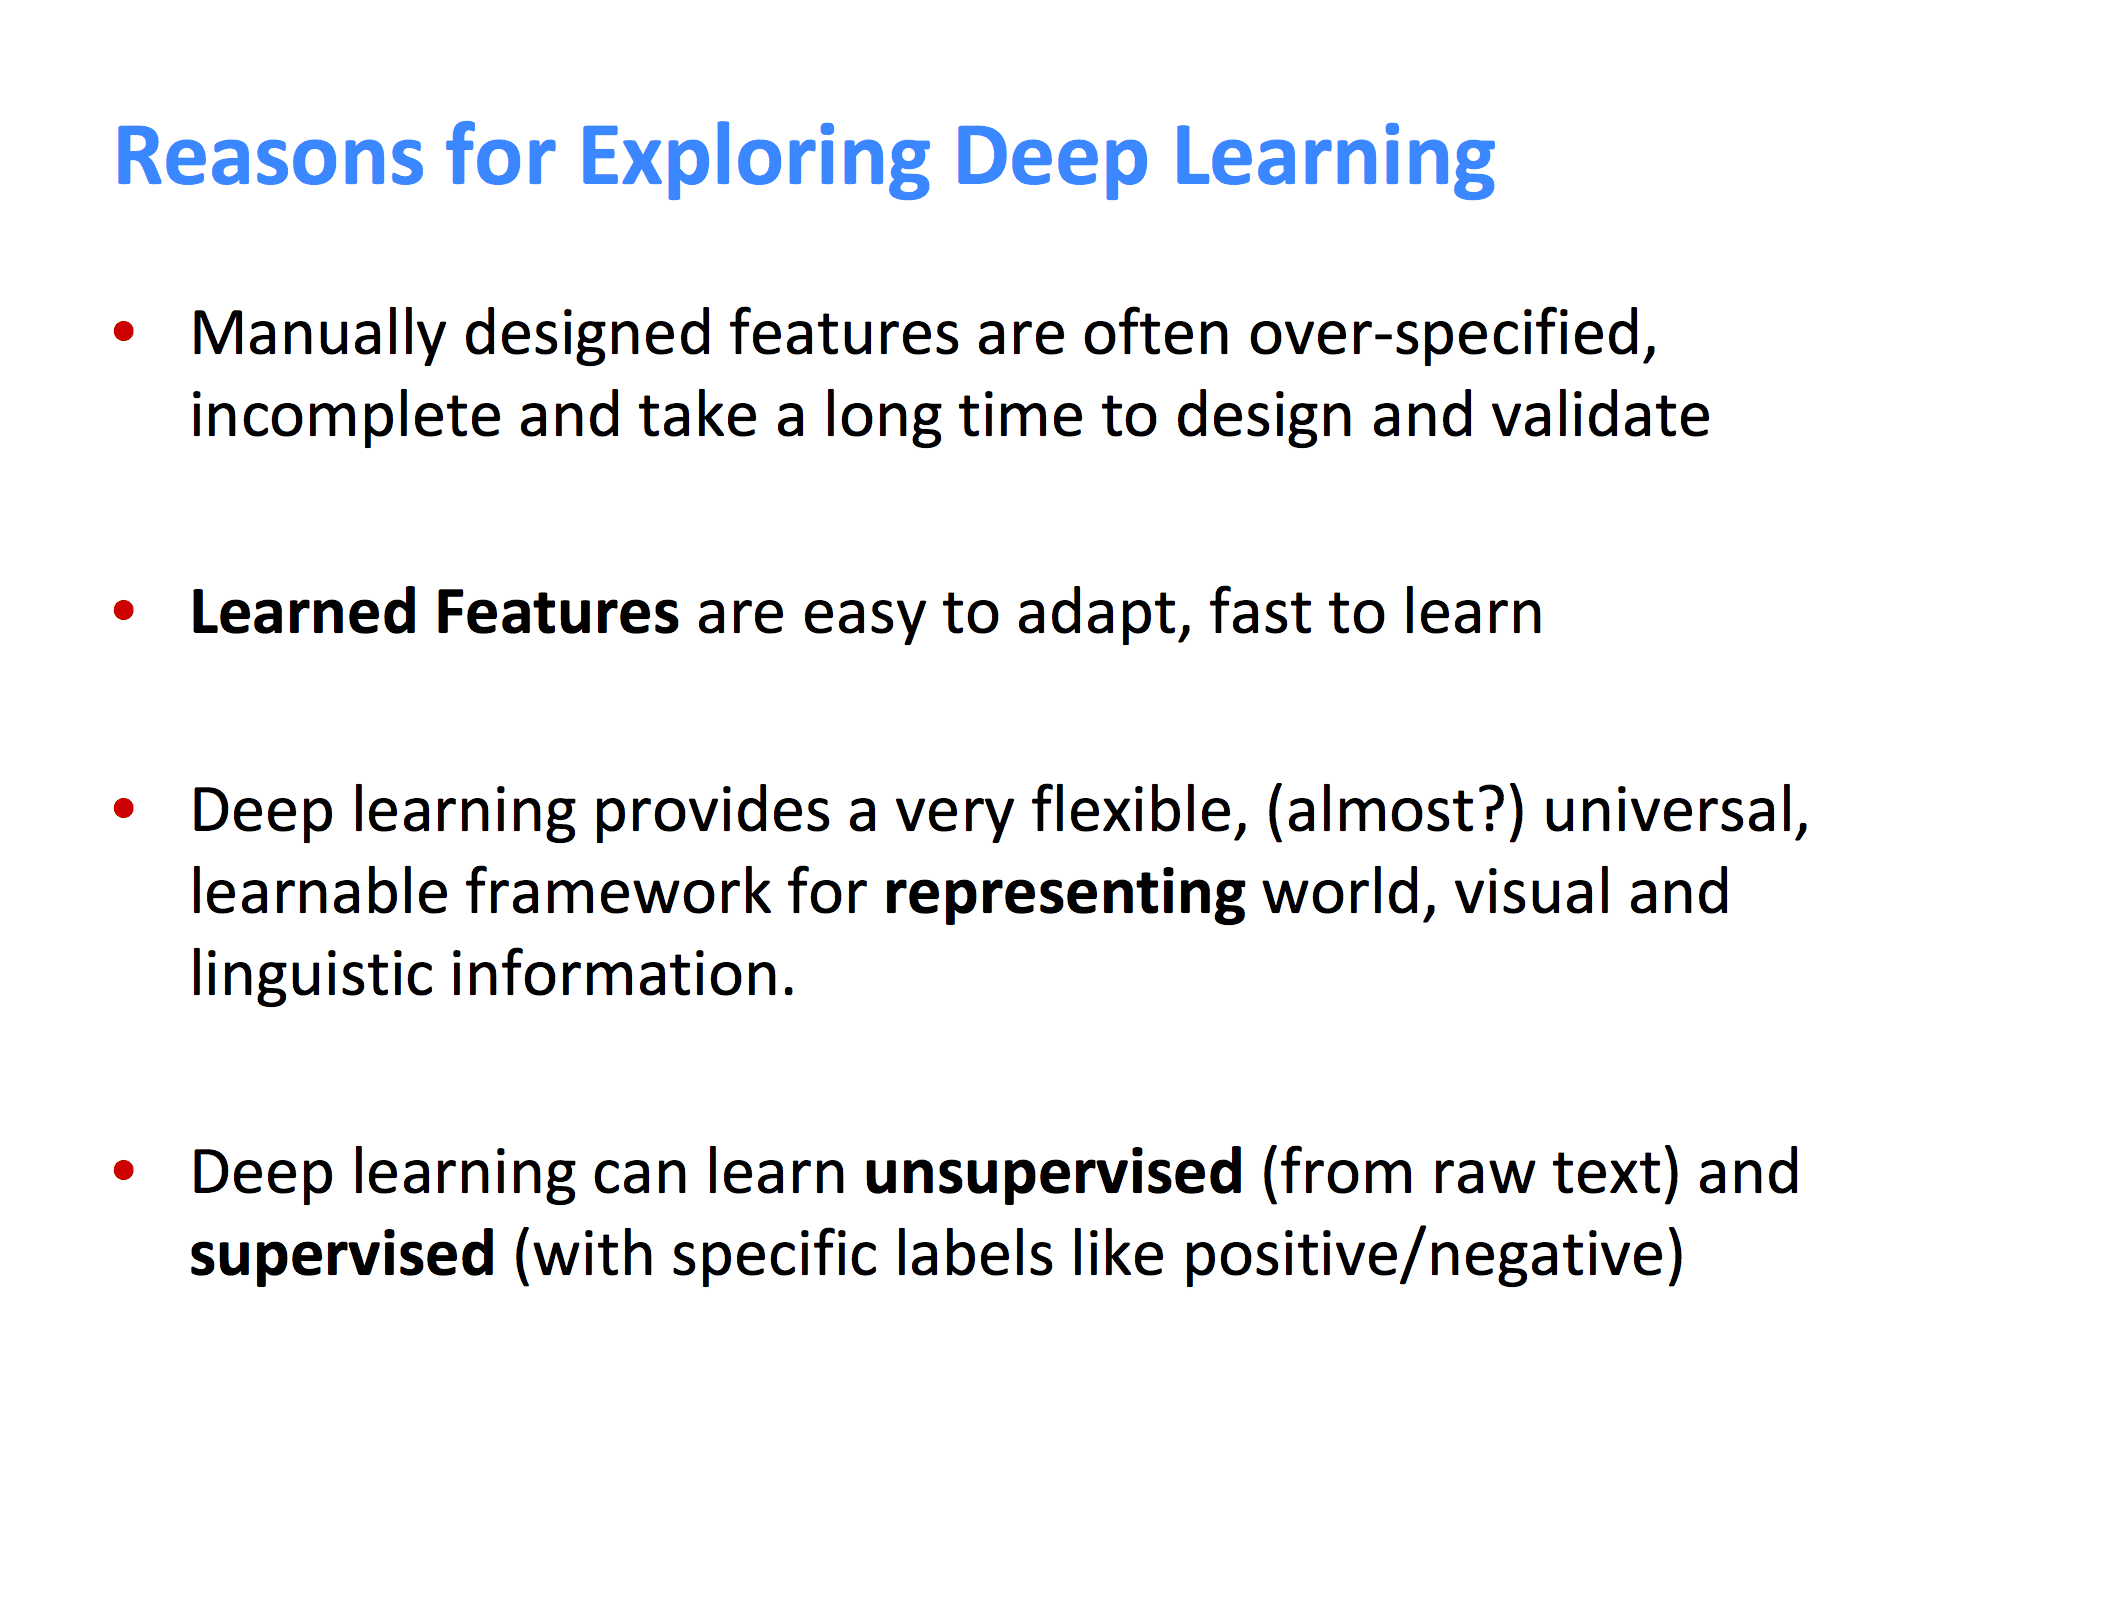 Reasons for Exploring Deep Learning, from the Stanford Deep Learning for NLP course